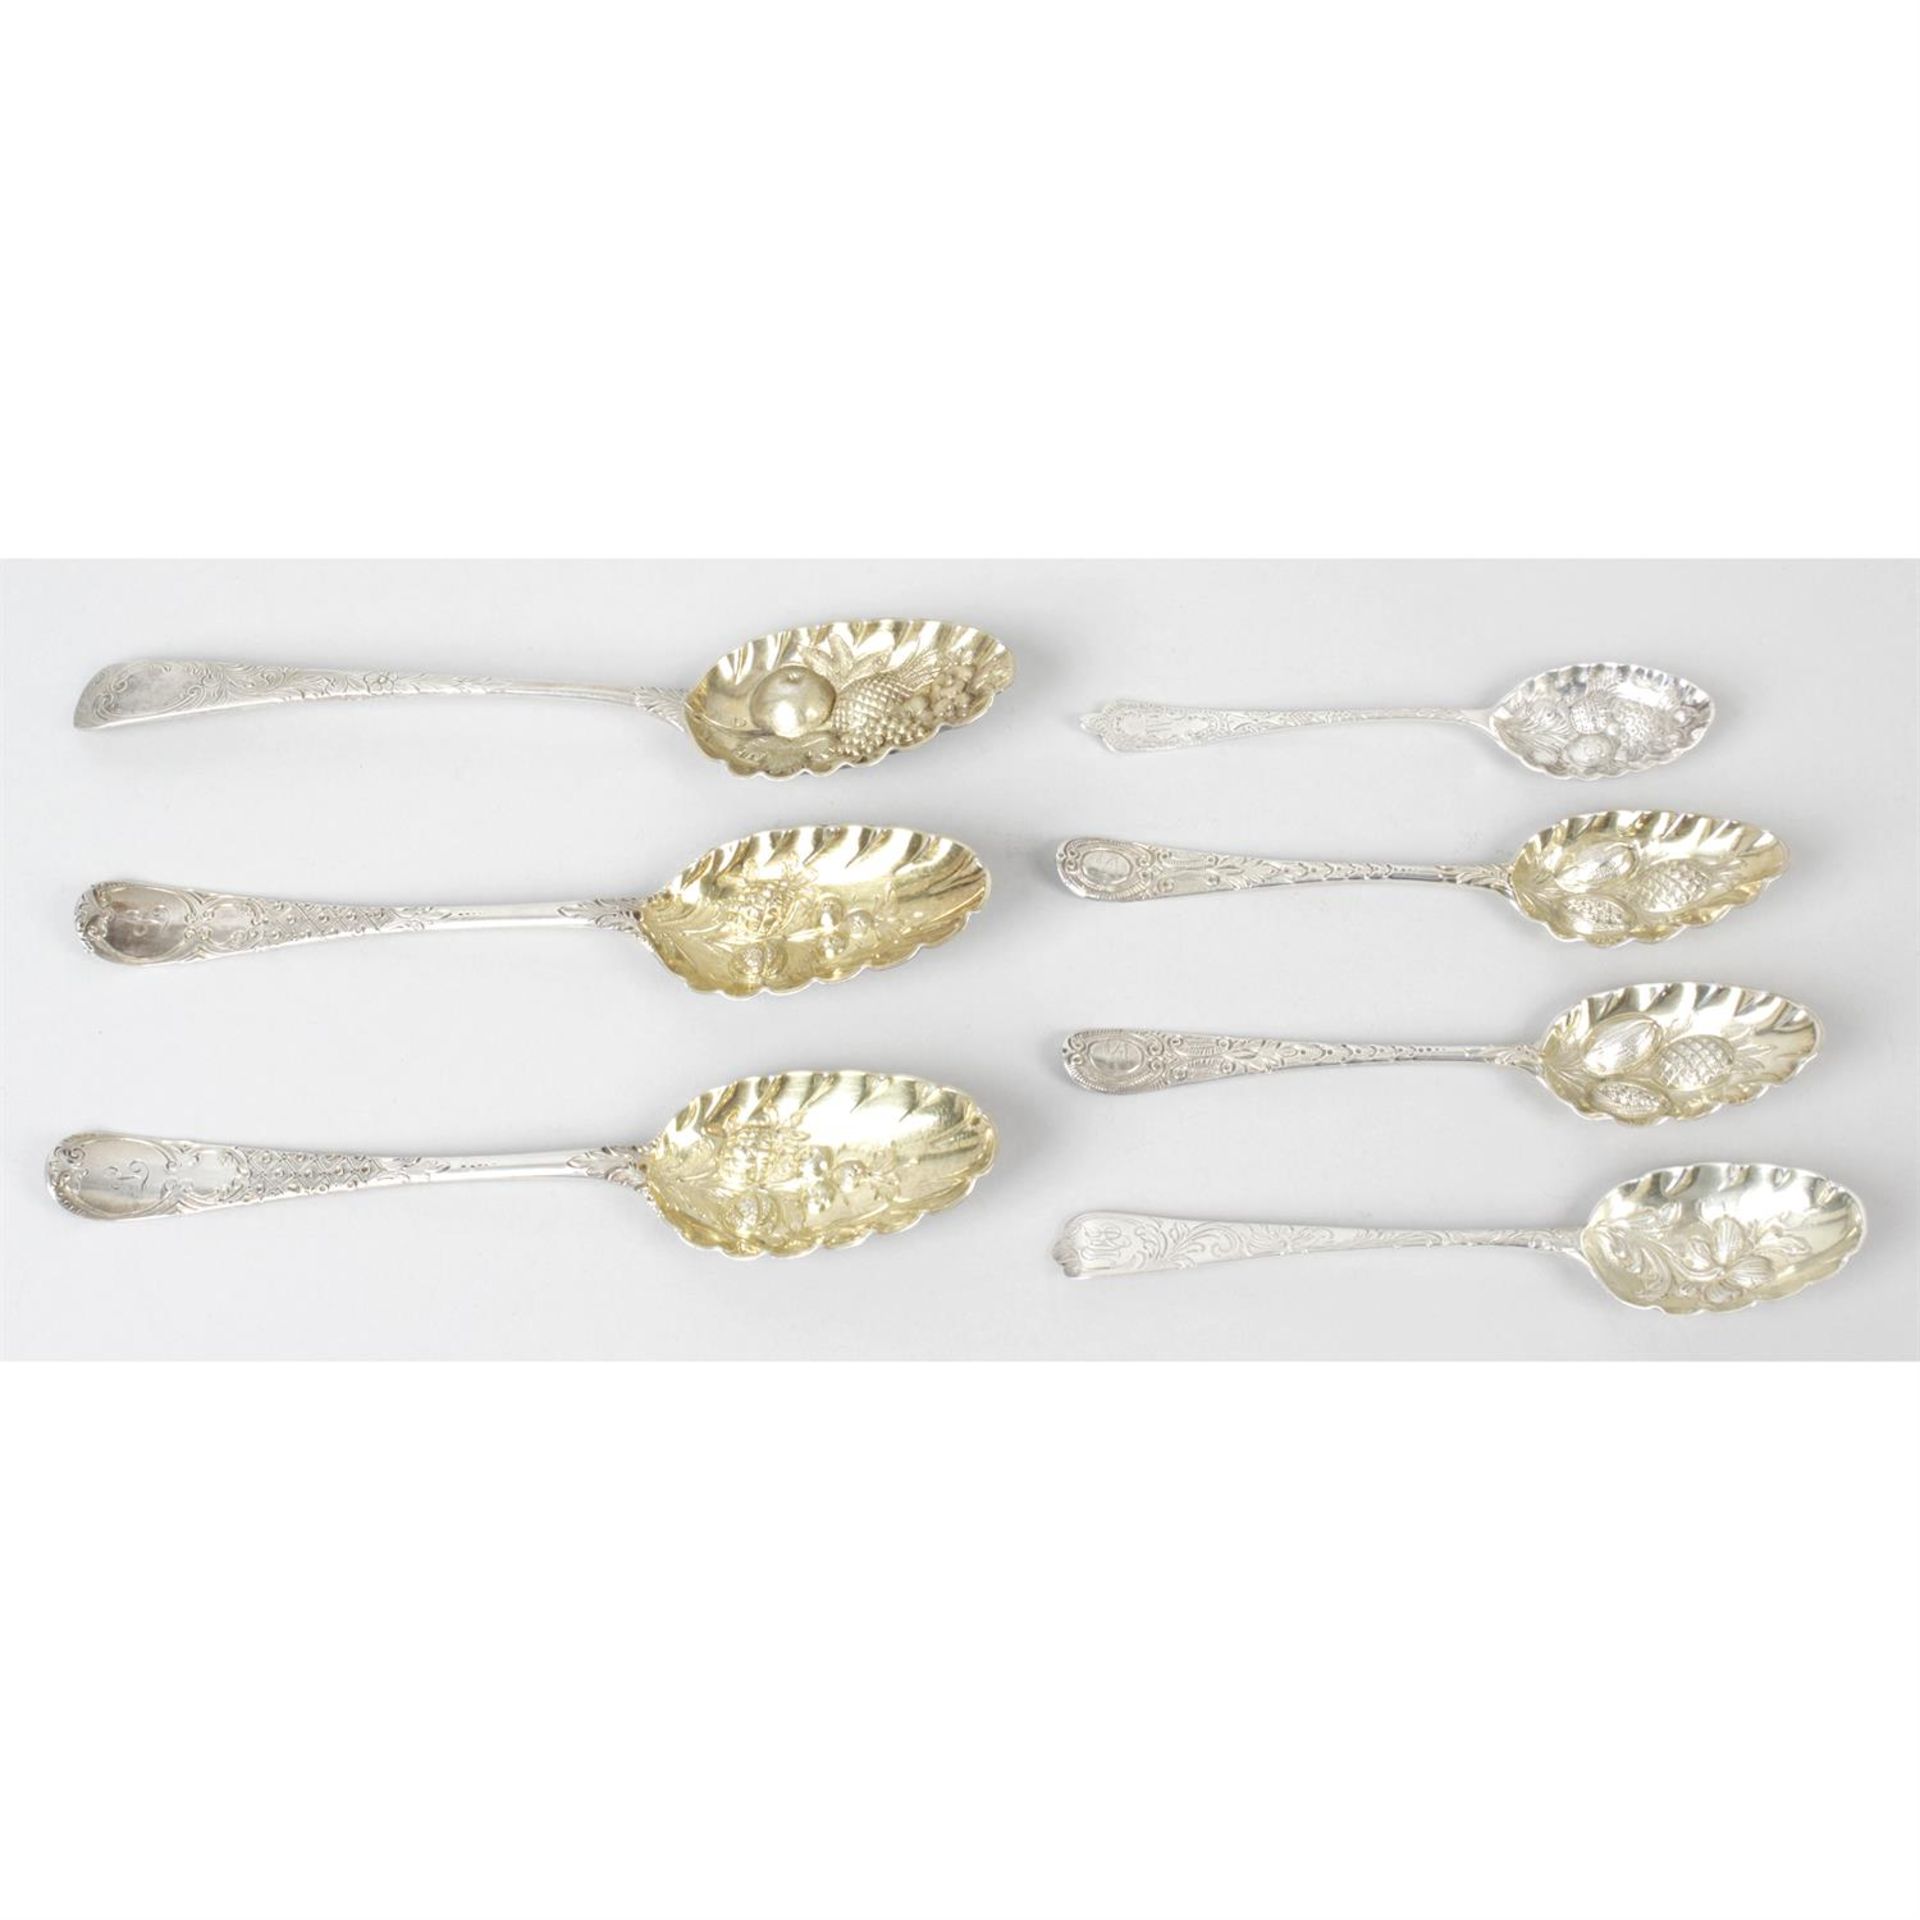 A selection of seven early Georgian & later 'berry spoons', comprising three table spoons & four